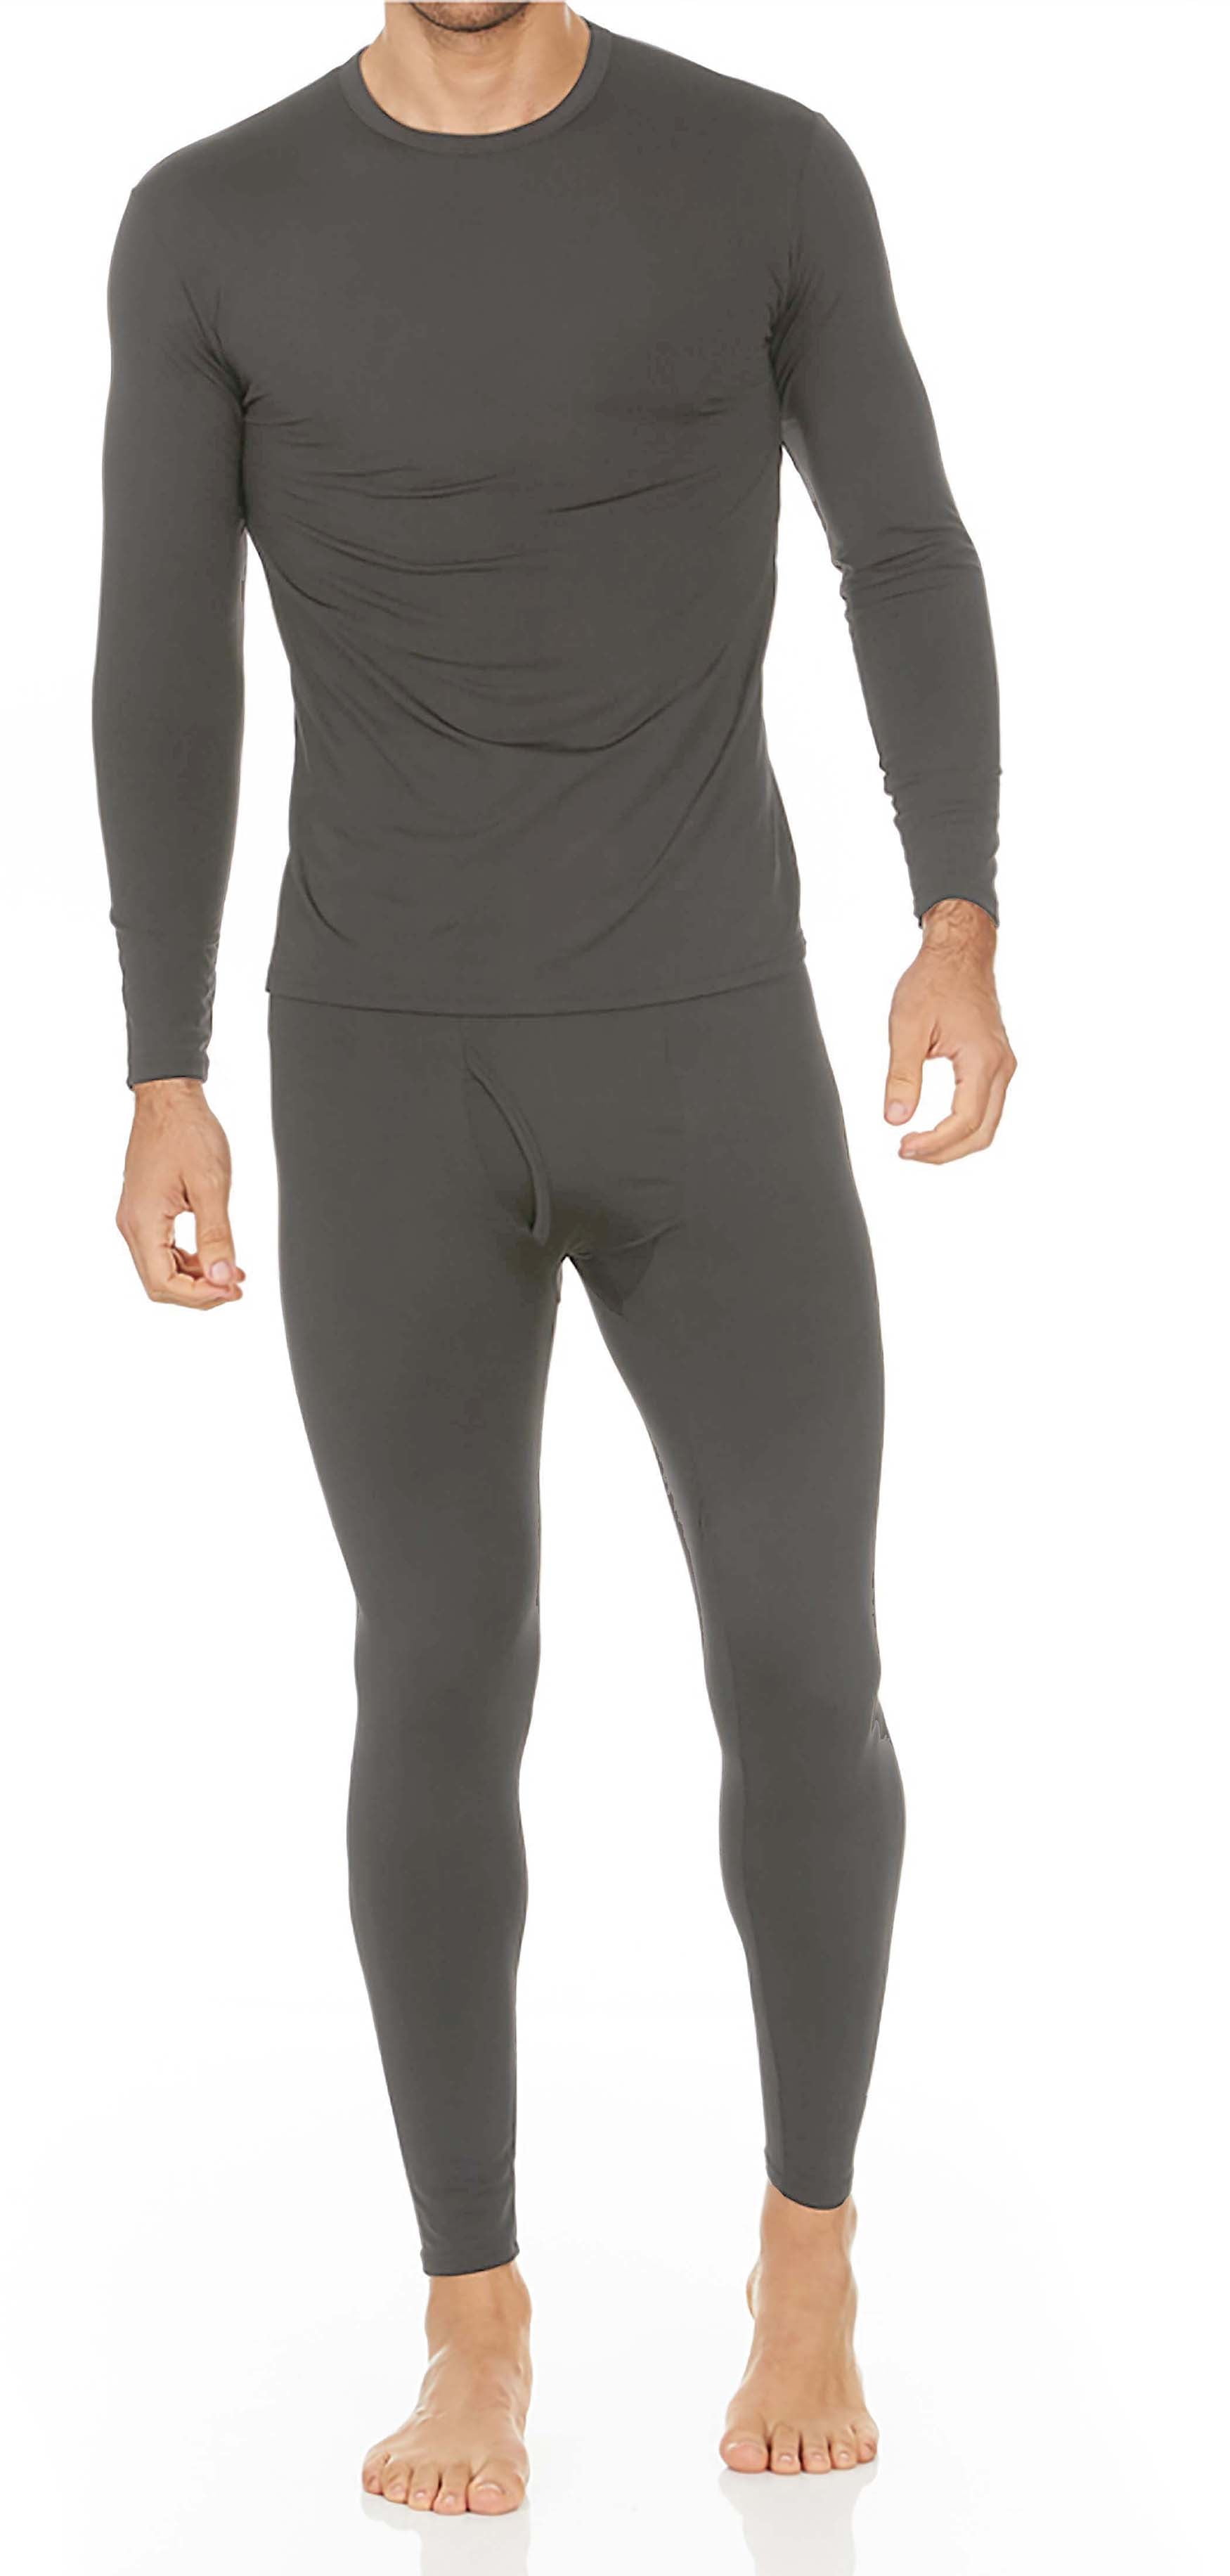 Moet Fashion Mens Ultra Soft Thermal Underwear Long Johns Set with Fleece Lined